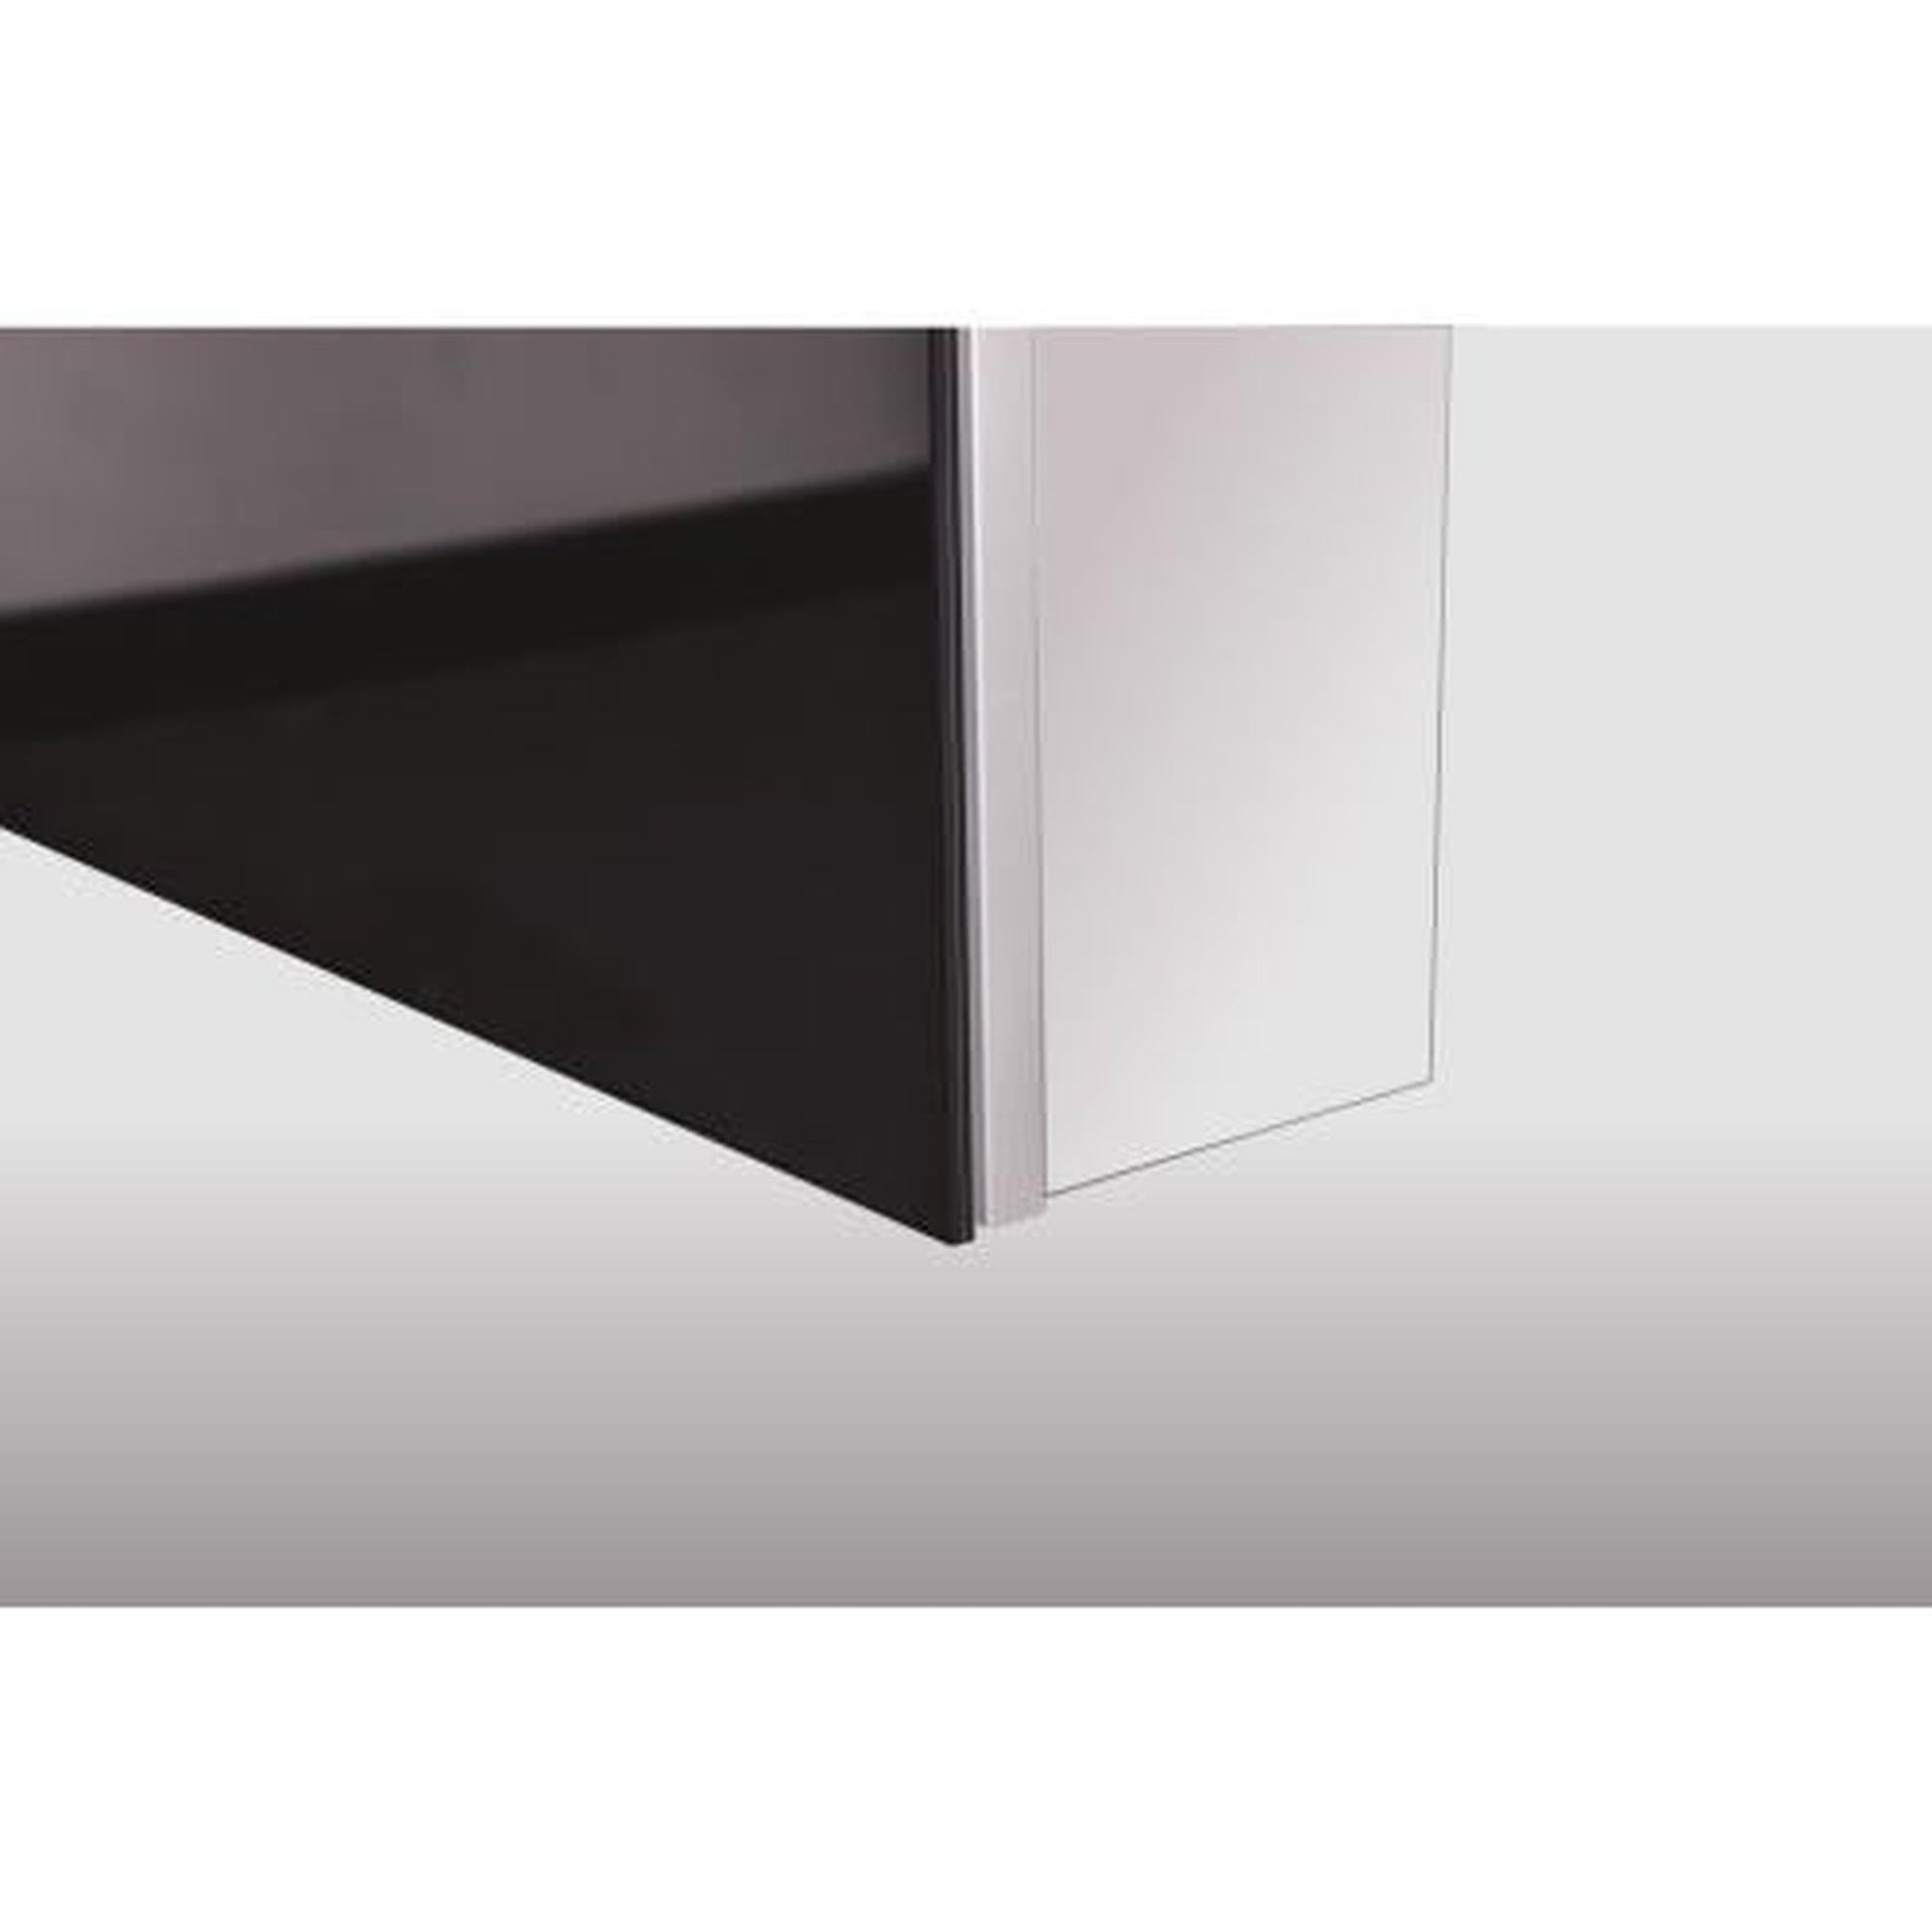 Sidler Tall Surface Mounting Kit for W 15" to 23", D 4" Cabinets